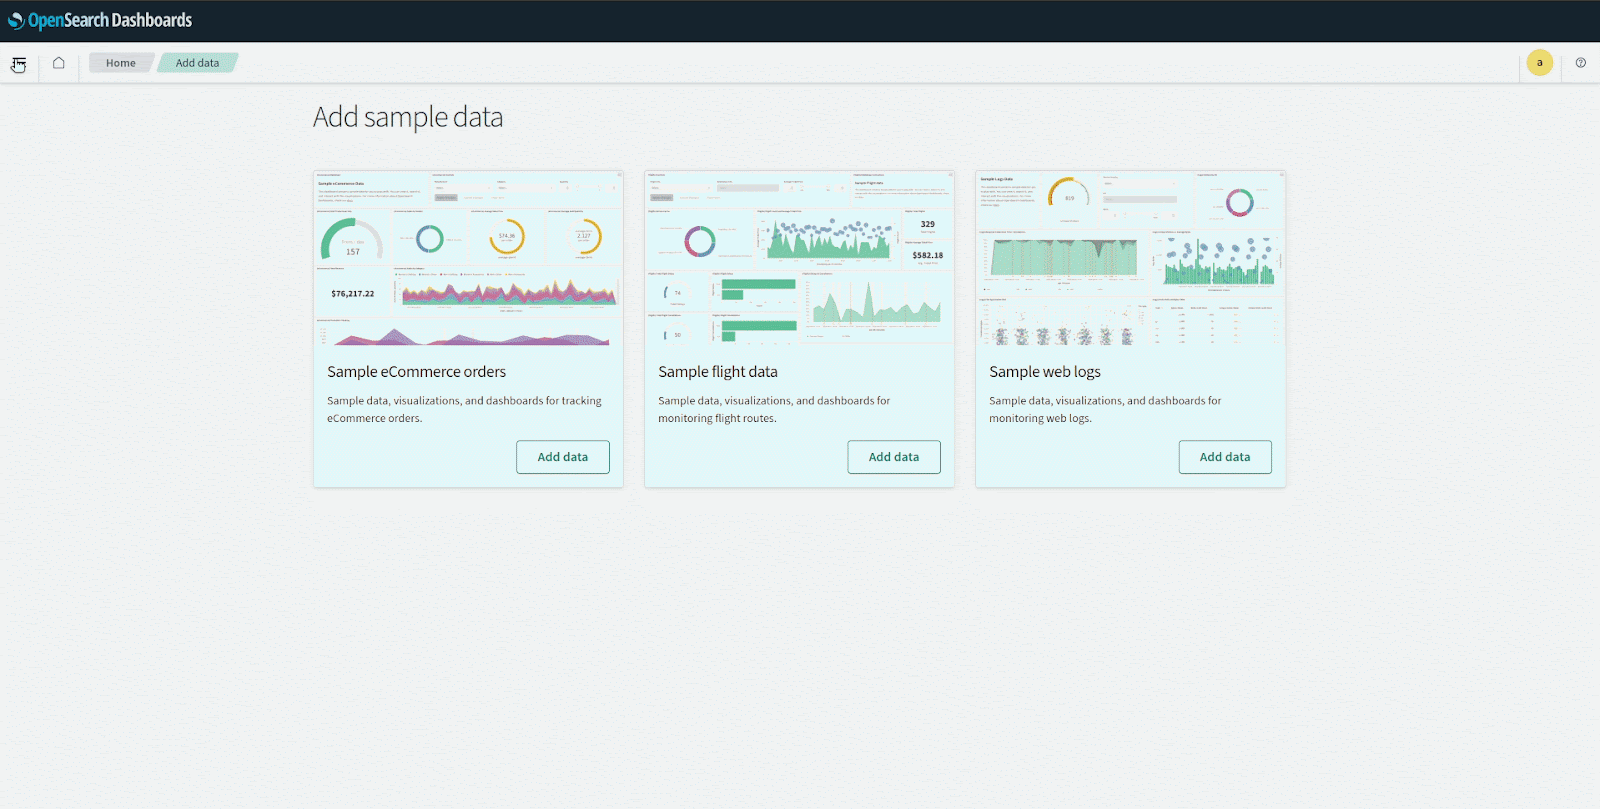 OpenSearch Dashboards